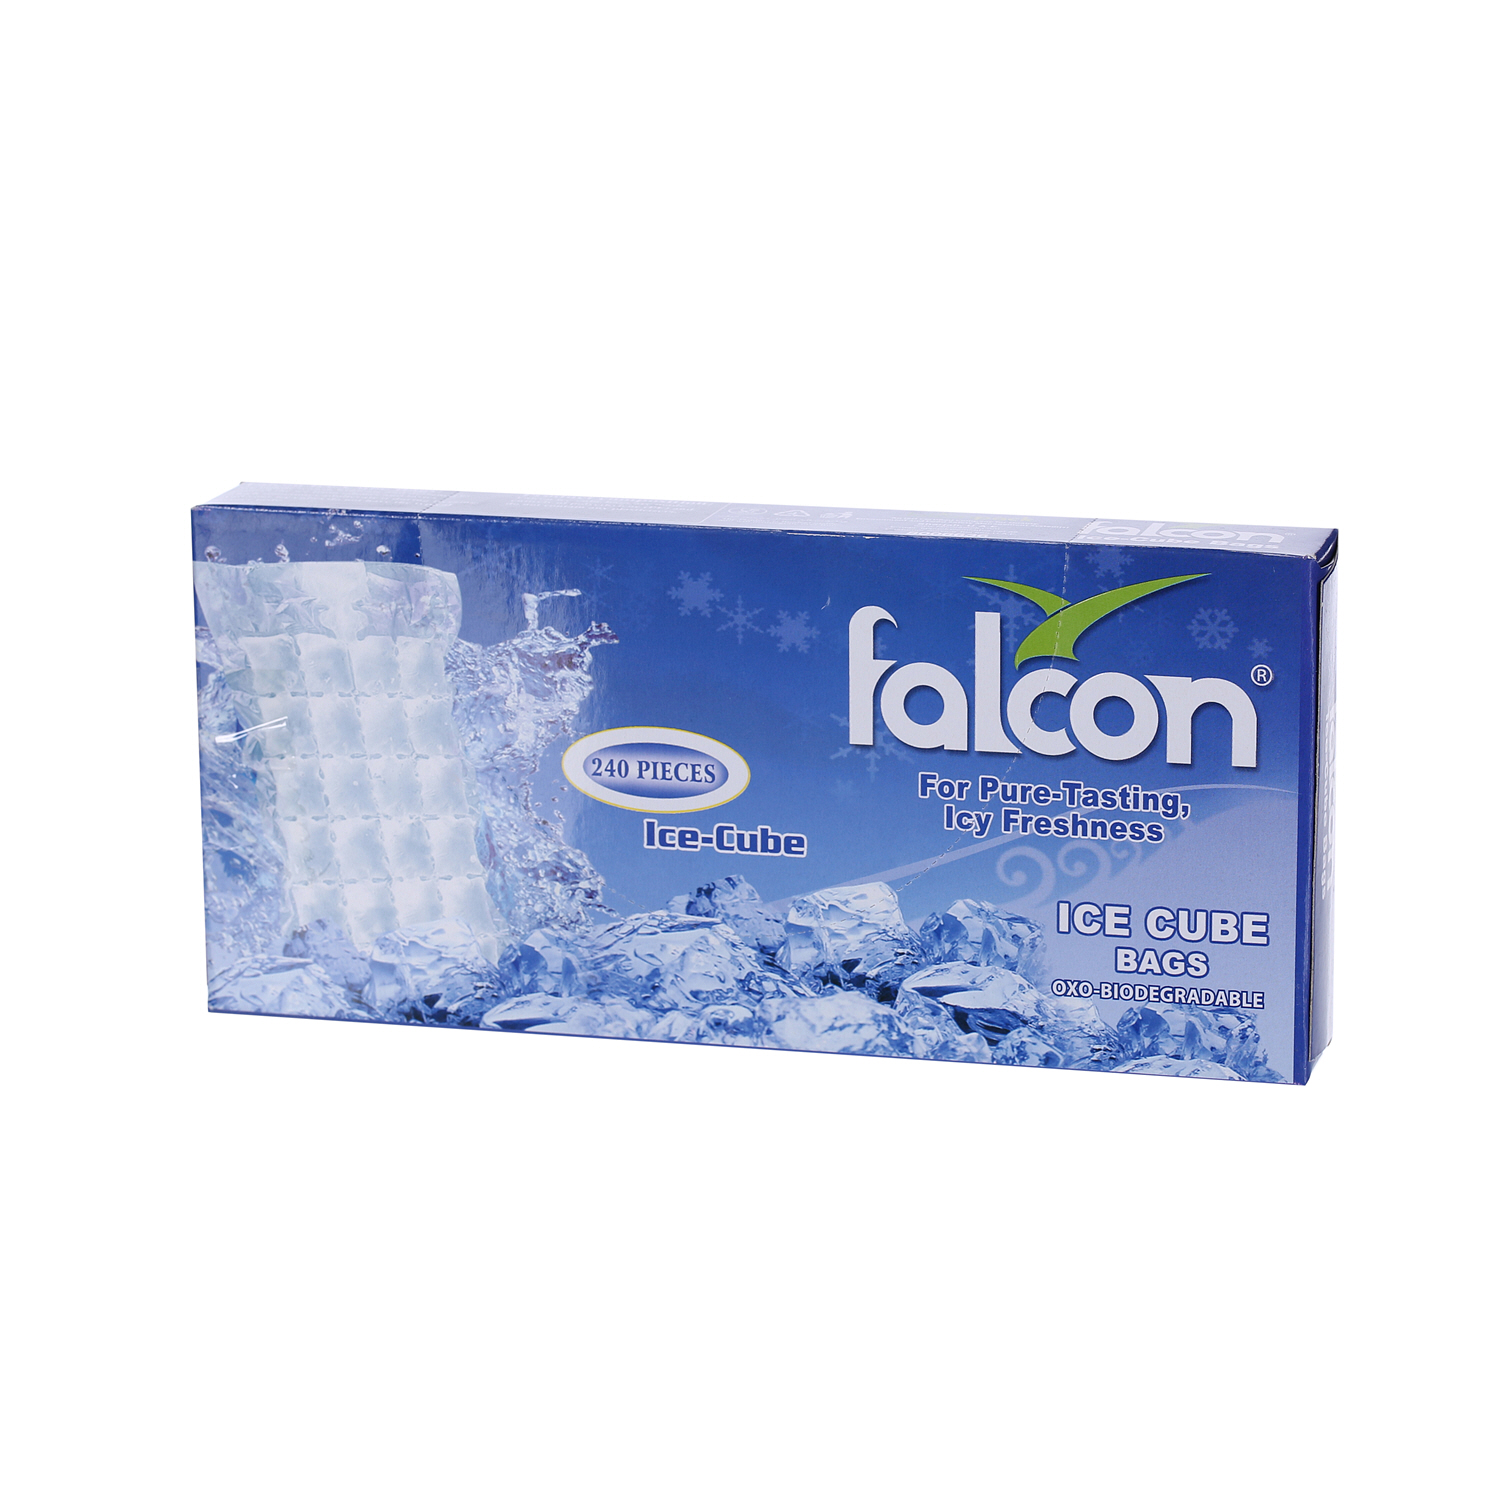 Falcon Ice Cube Bags 10 Pack